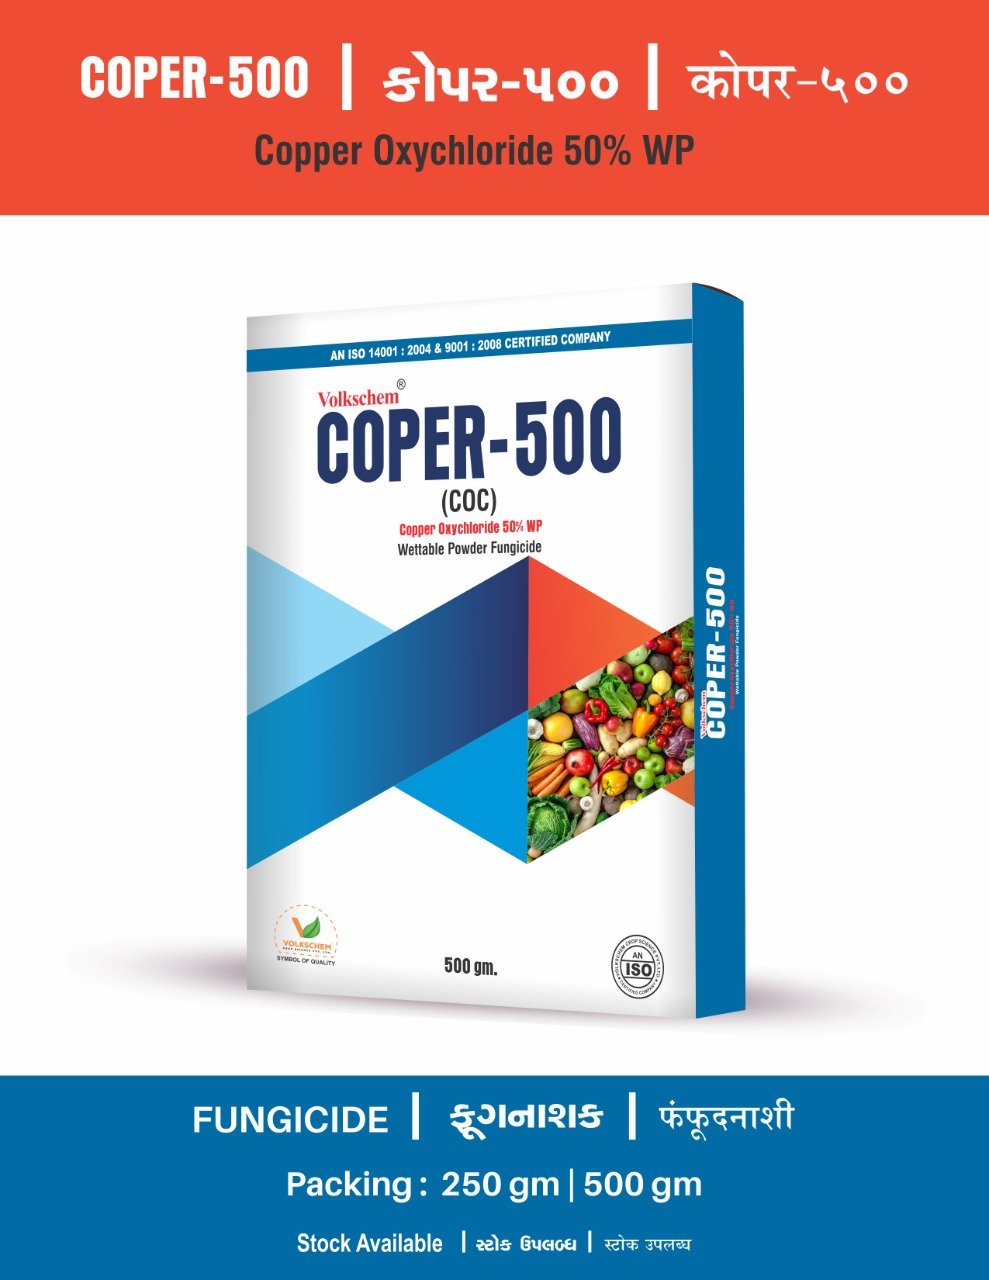 Copper oxichloride 50% wp